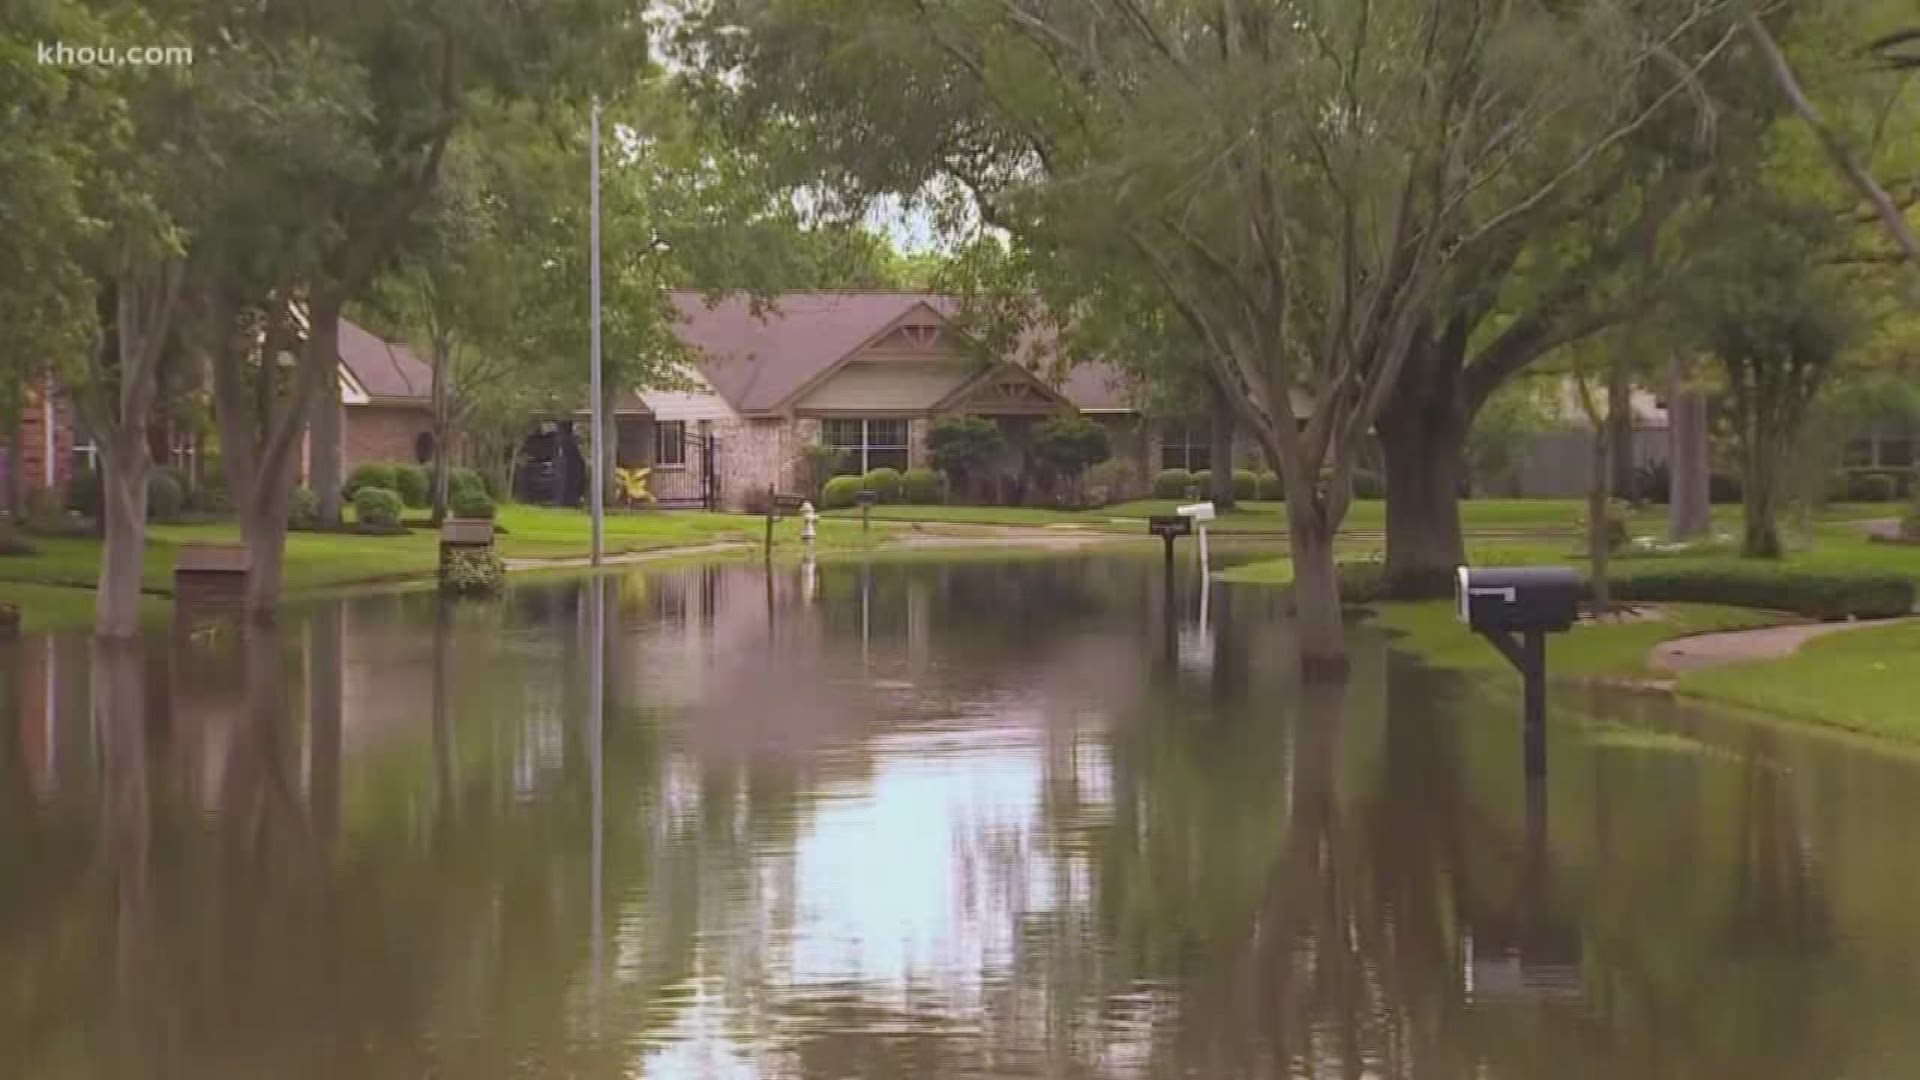 With more rain on the way, Sugar Land warns streets, homes could flood